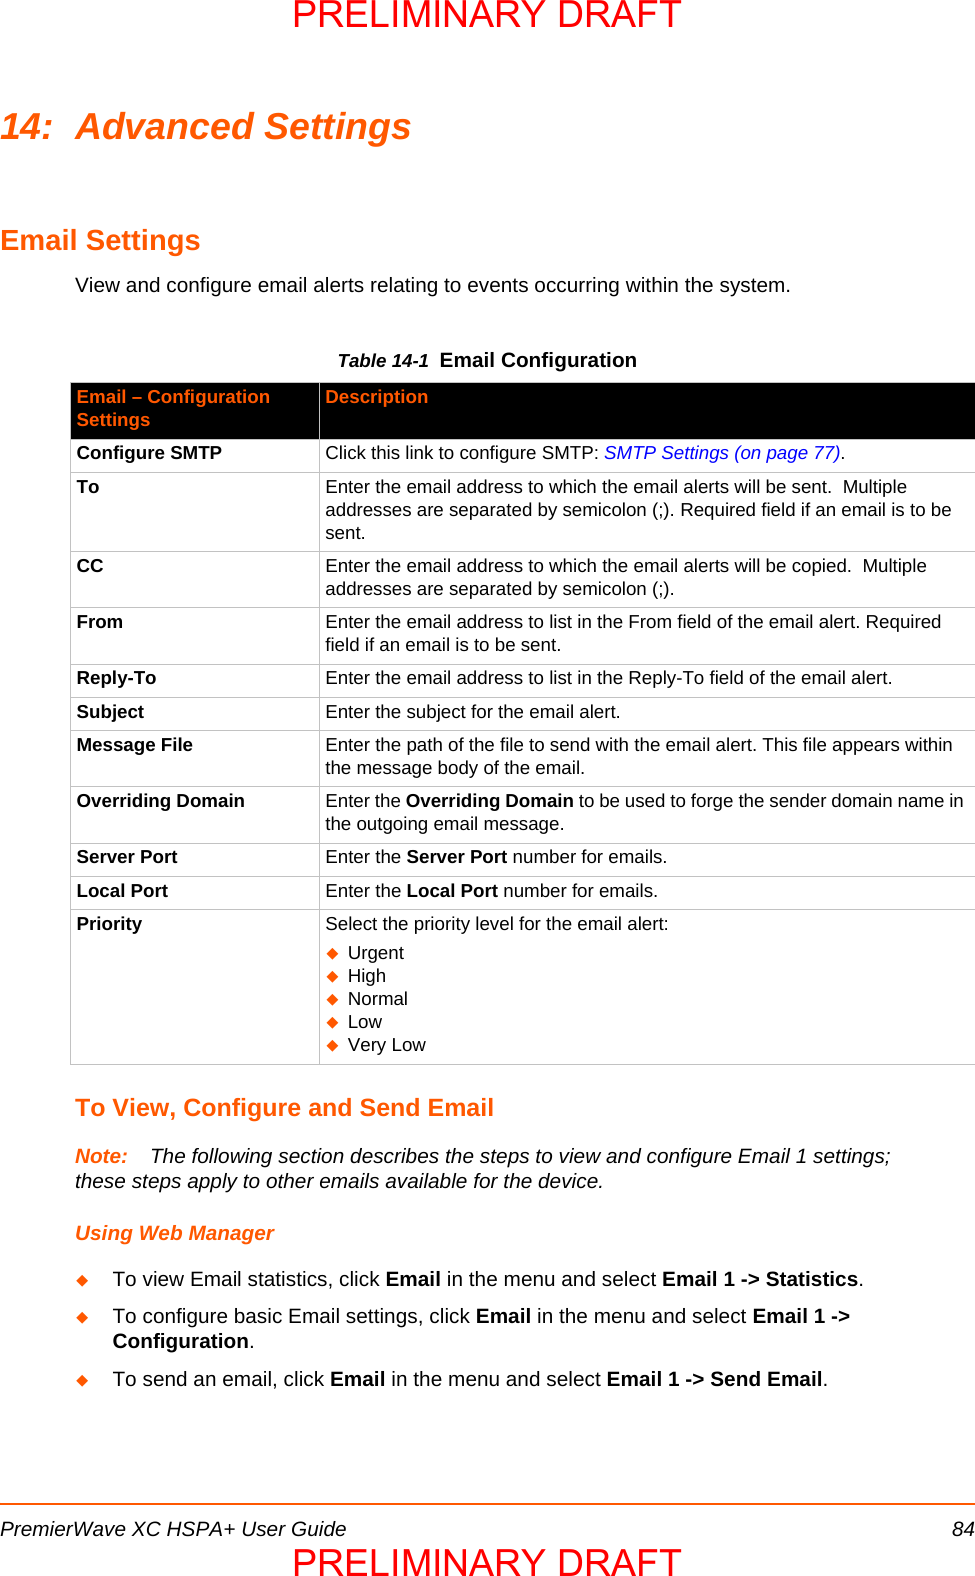 PremierWave XC HSPA+ User Guide 8414: Advanced SettingsEmail SettingsView and configure email alerts relating to events occurring within the system.Table 14-1  Email ConfigurationTo View, Configure and Send EmailNote: The following section describes the steps to view and configure Email 1 settings; these steps apply to other emails available for the device.Using Web ManagerTo view Email statistics, click Email in the menu and select Email 1 -&gt; Statistics. To configure basic Email settings, click Email in the menu and select Email 1 -&gt; Configuration.To send an email, click Email in the menu and select Email 1 -&gt; Send Email.Email – Configuration Settings DescriptionConfigure SMTP Click this link to configure SMTP: SMTP Settings (on page 77). To Enter the email address to which the email alerts will be sent.  Multiple addresses are separated by semicolon (;). Required field if an email is to be sent.CC Enter the email address to which the email alerts will be copied.  Multiple addresses are separated by semicolon (;).From Enter the email address to list in the From field of the email alert. Required field if an email is to be sent.Reply-To Enter the email address to list in the Reply-To field of the email alert.Subject Enter the subject for the email alert.Message File Enter the path of the file to send with the email alert. This file appears within the message body of the email.Overriding Domain Enter the Overriding Domain to be used to forge the sender domain name in the outgoing email message.  Server Port Enter the Server Port number for emails.Local Port Enter the Local Port number for emails.Priority Select the priority level for the email alert:UrgentHighNormalLowVery LowPRELIMINARY DRAFTPRELIMINARY DRAFT